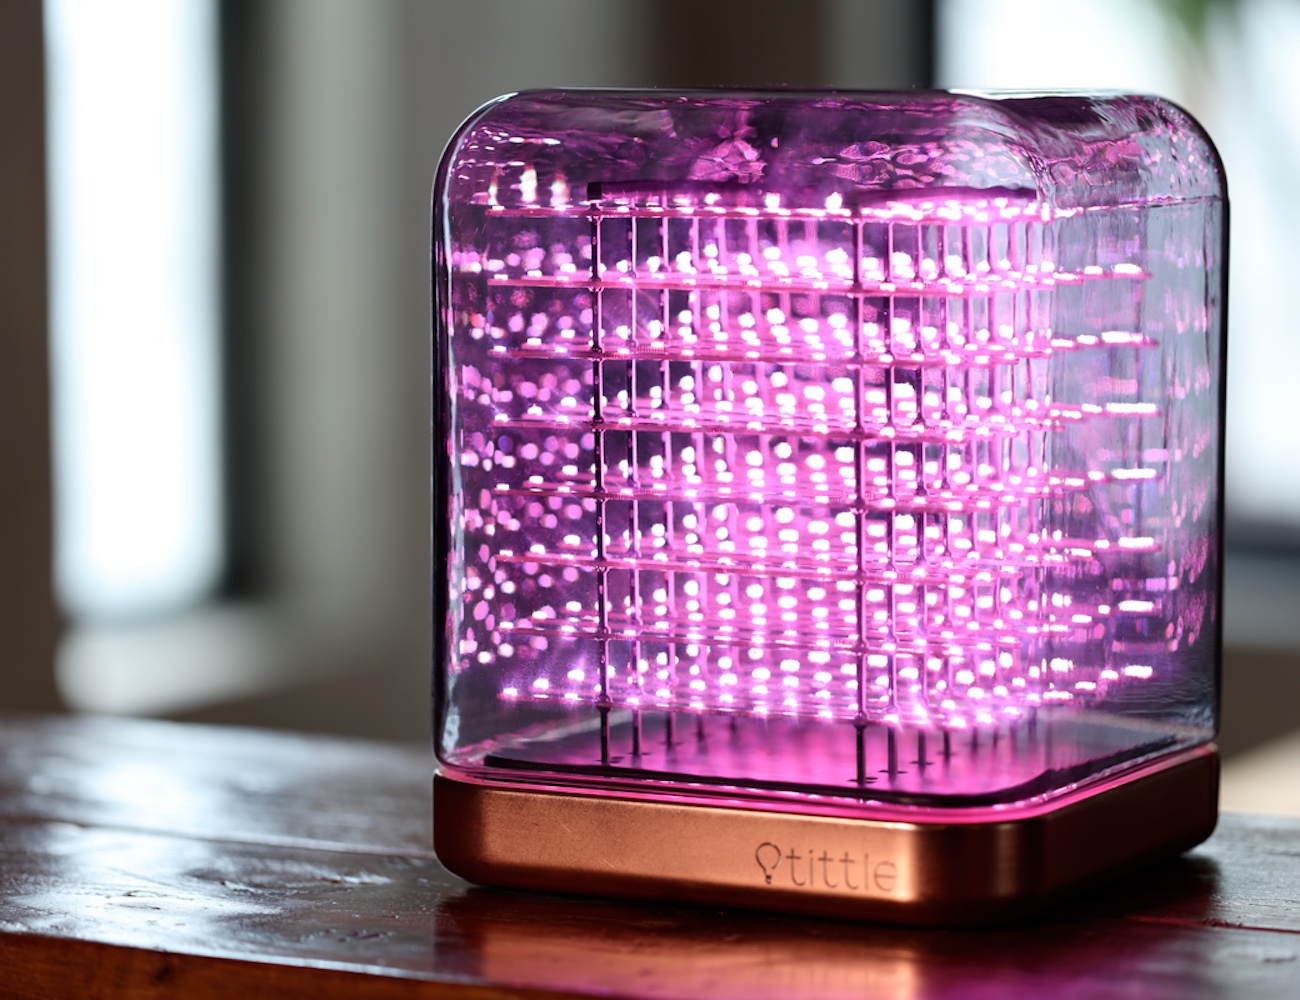 Tittle Light Innovative LED Light Cube offers mood lighting and more